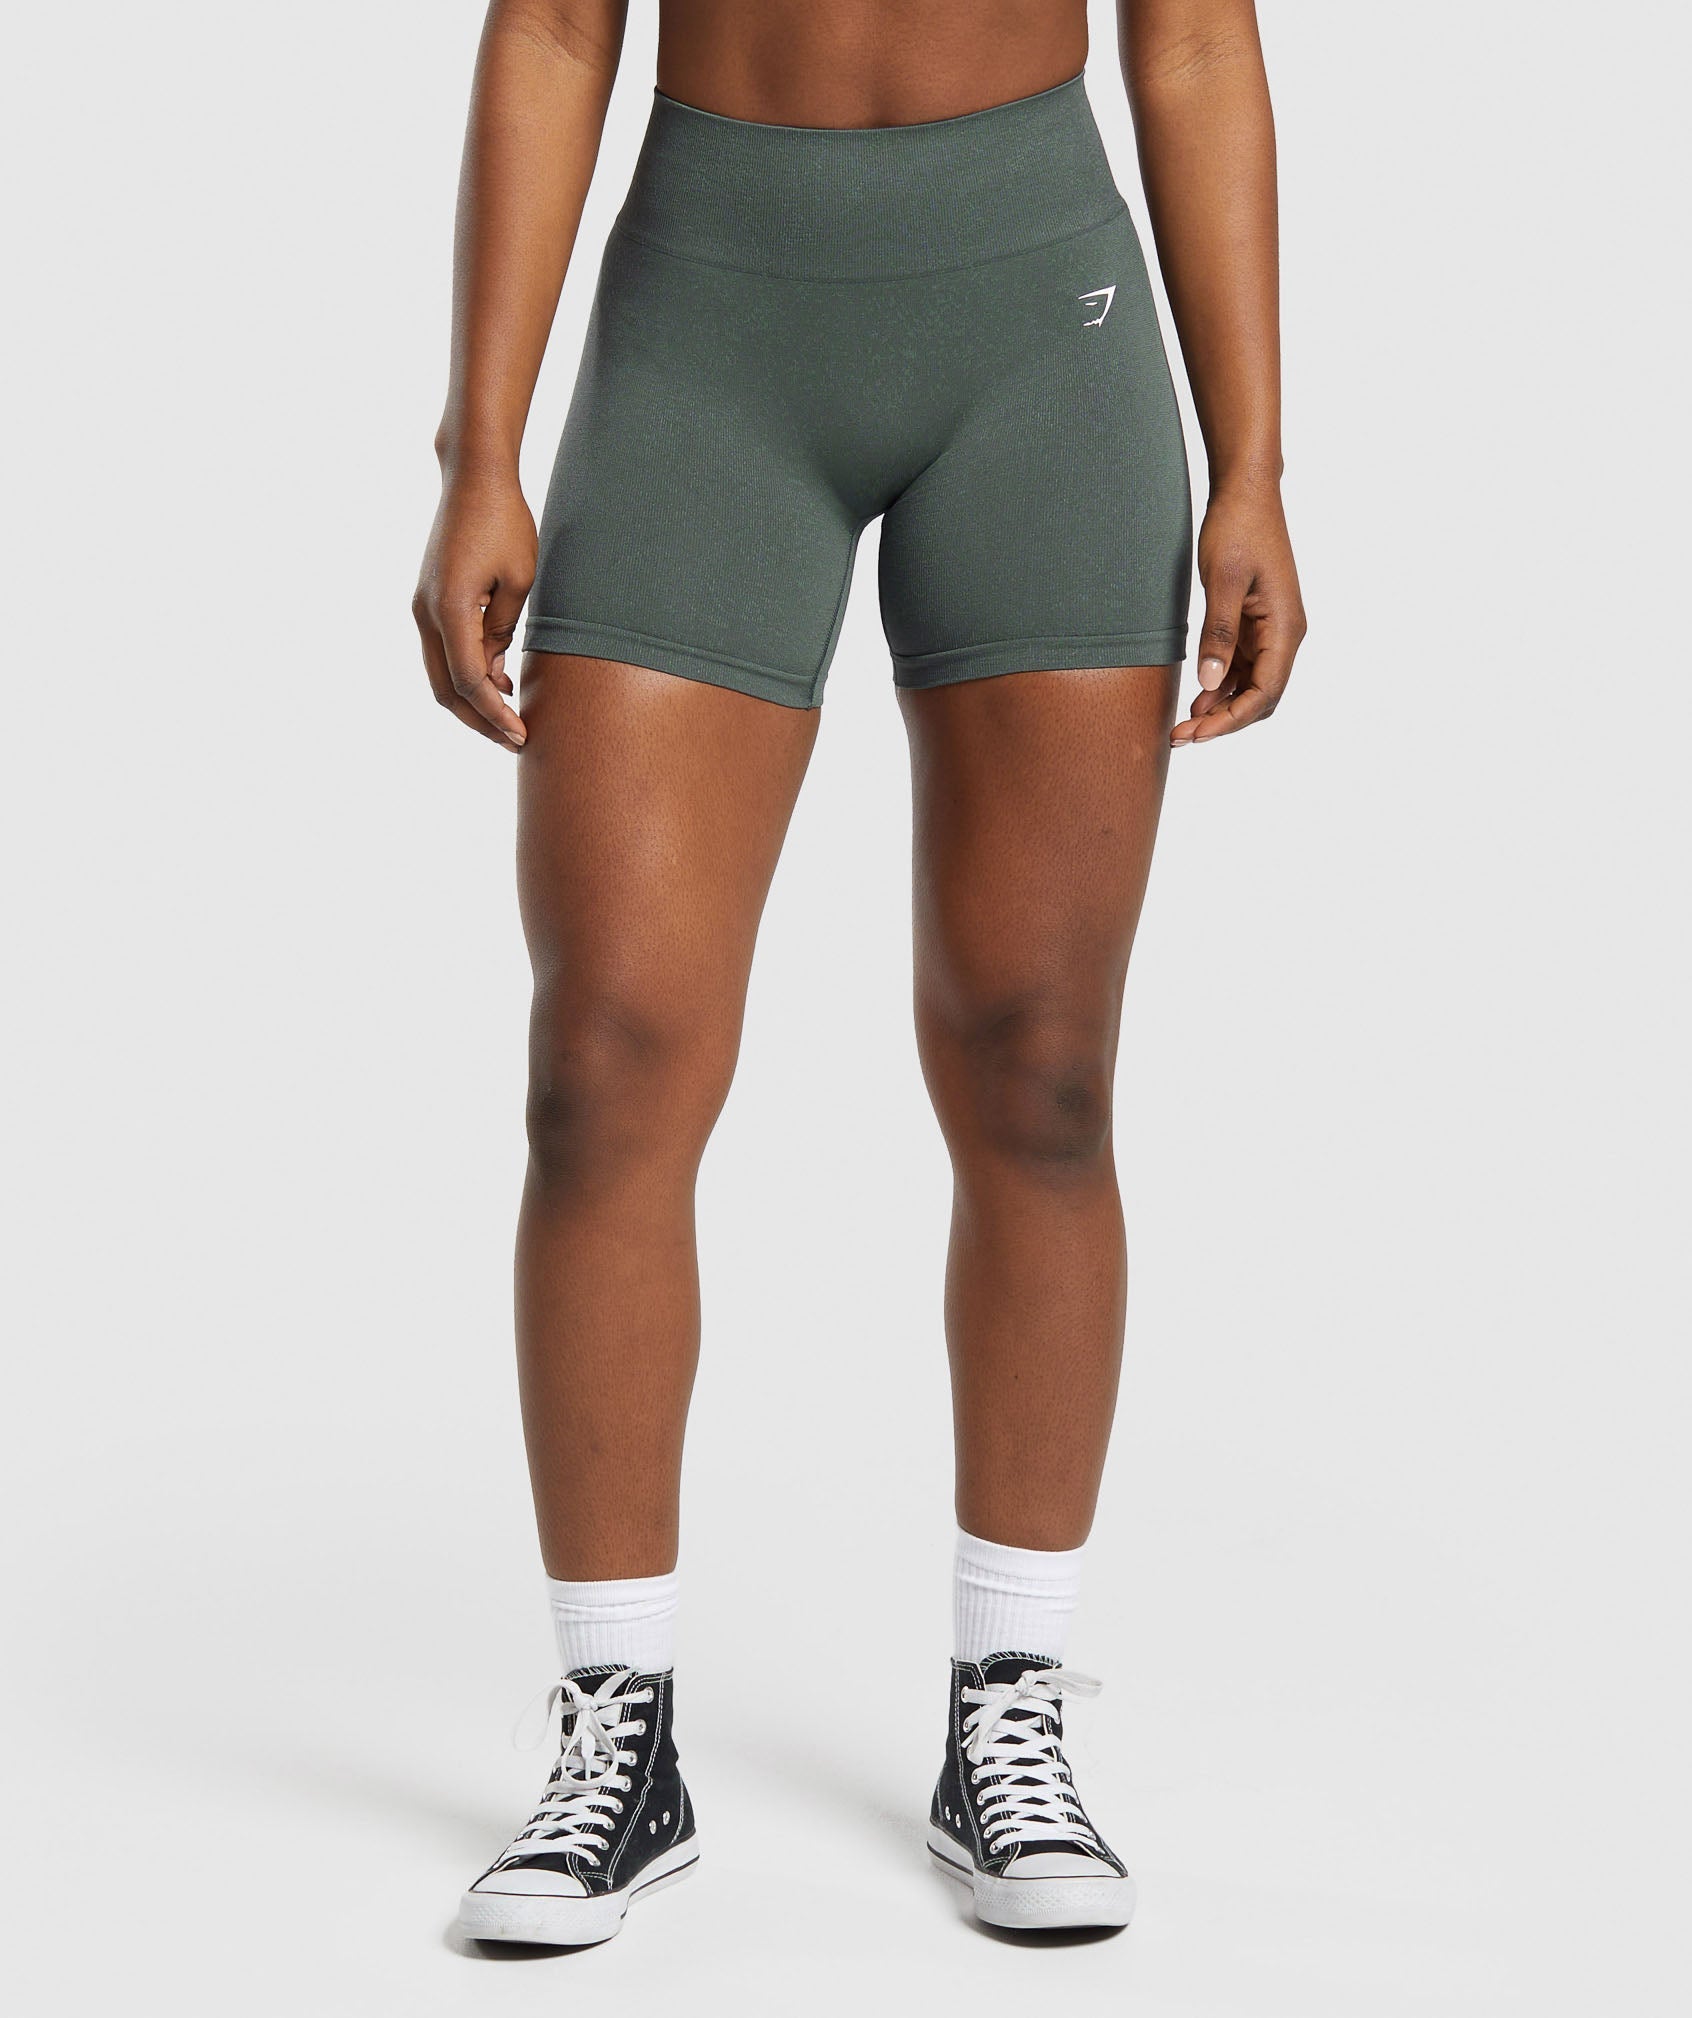 Adapt Fleck Seamless Shorts in Slate Teal/Cargo Teal